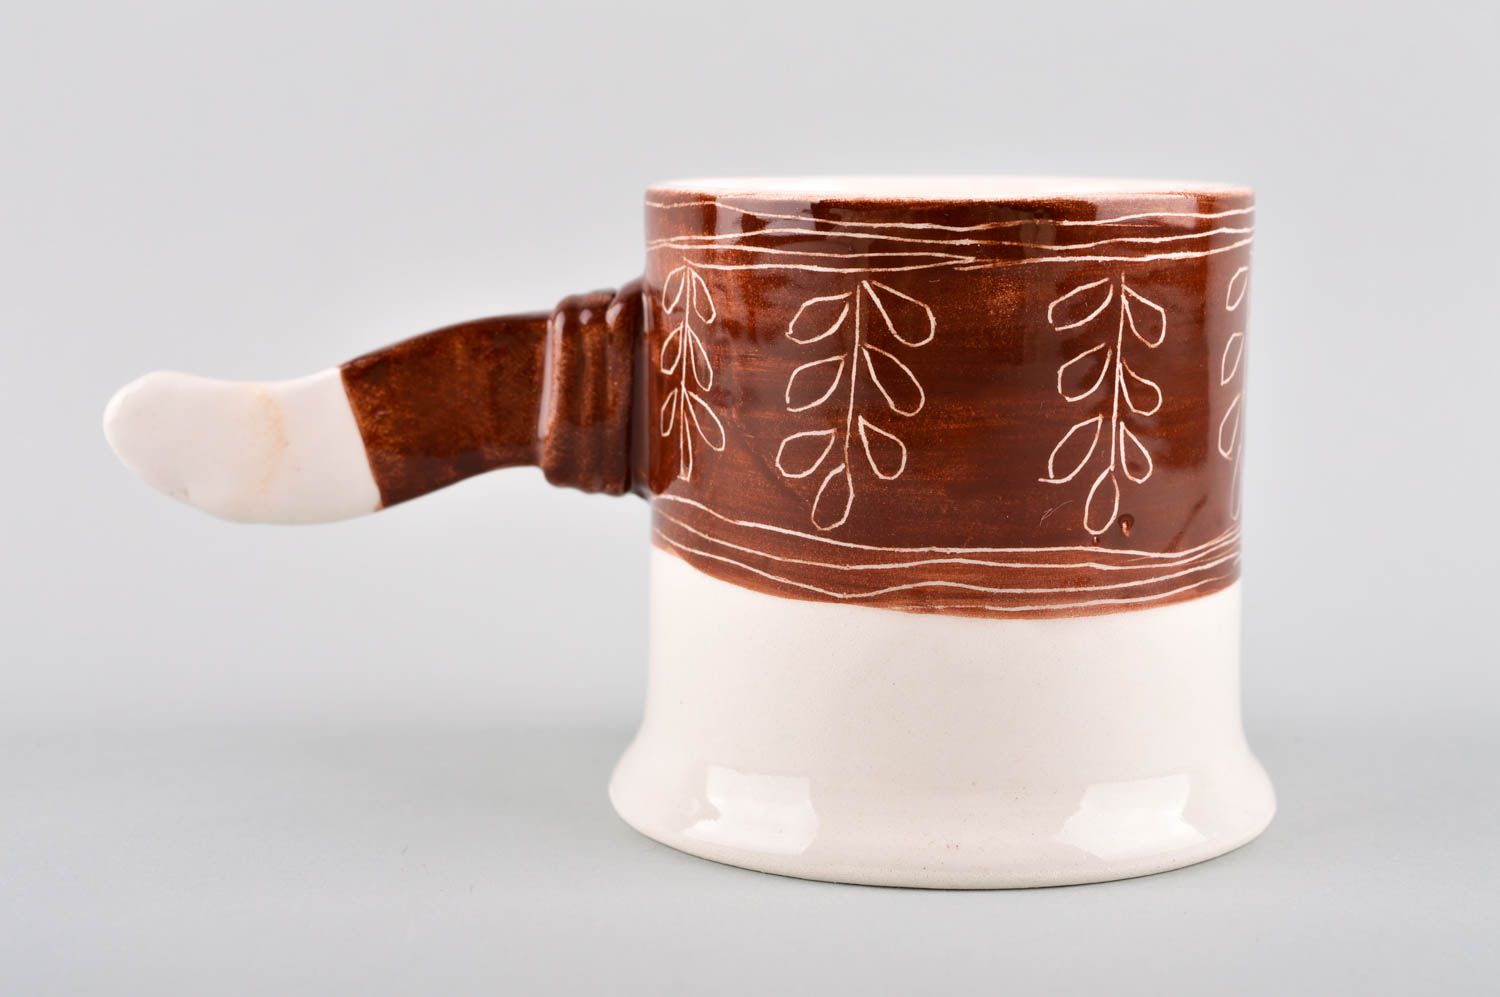 Teacup in white and brown cherry colors and non-standard handle in the shape of a stick photo 2